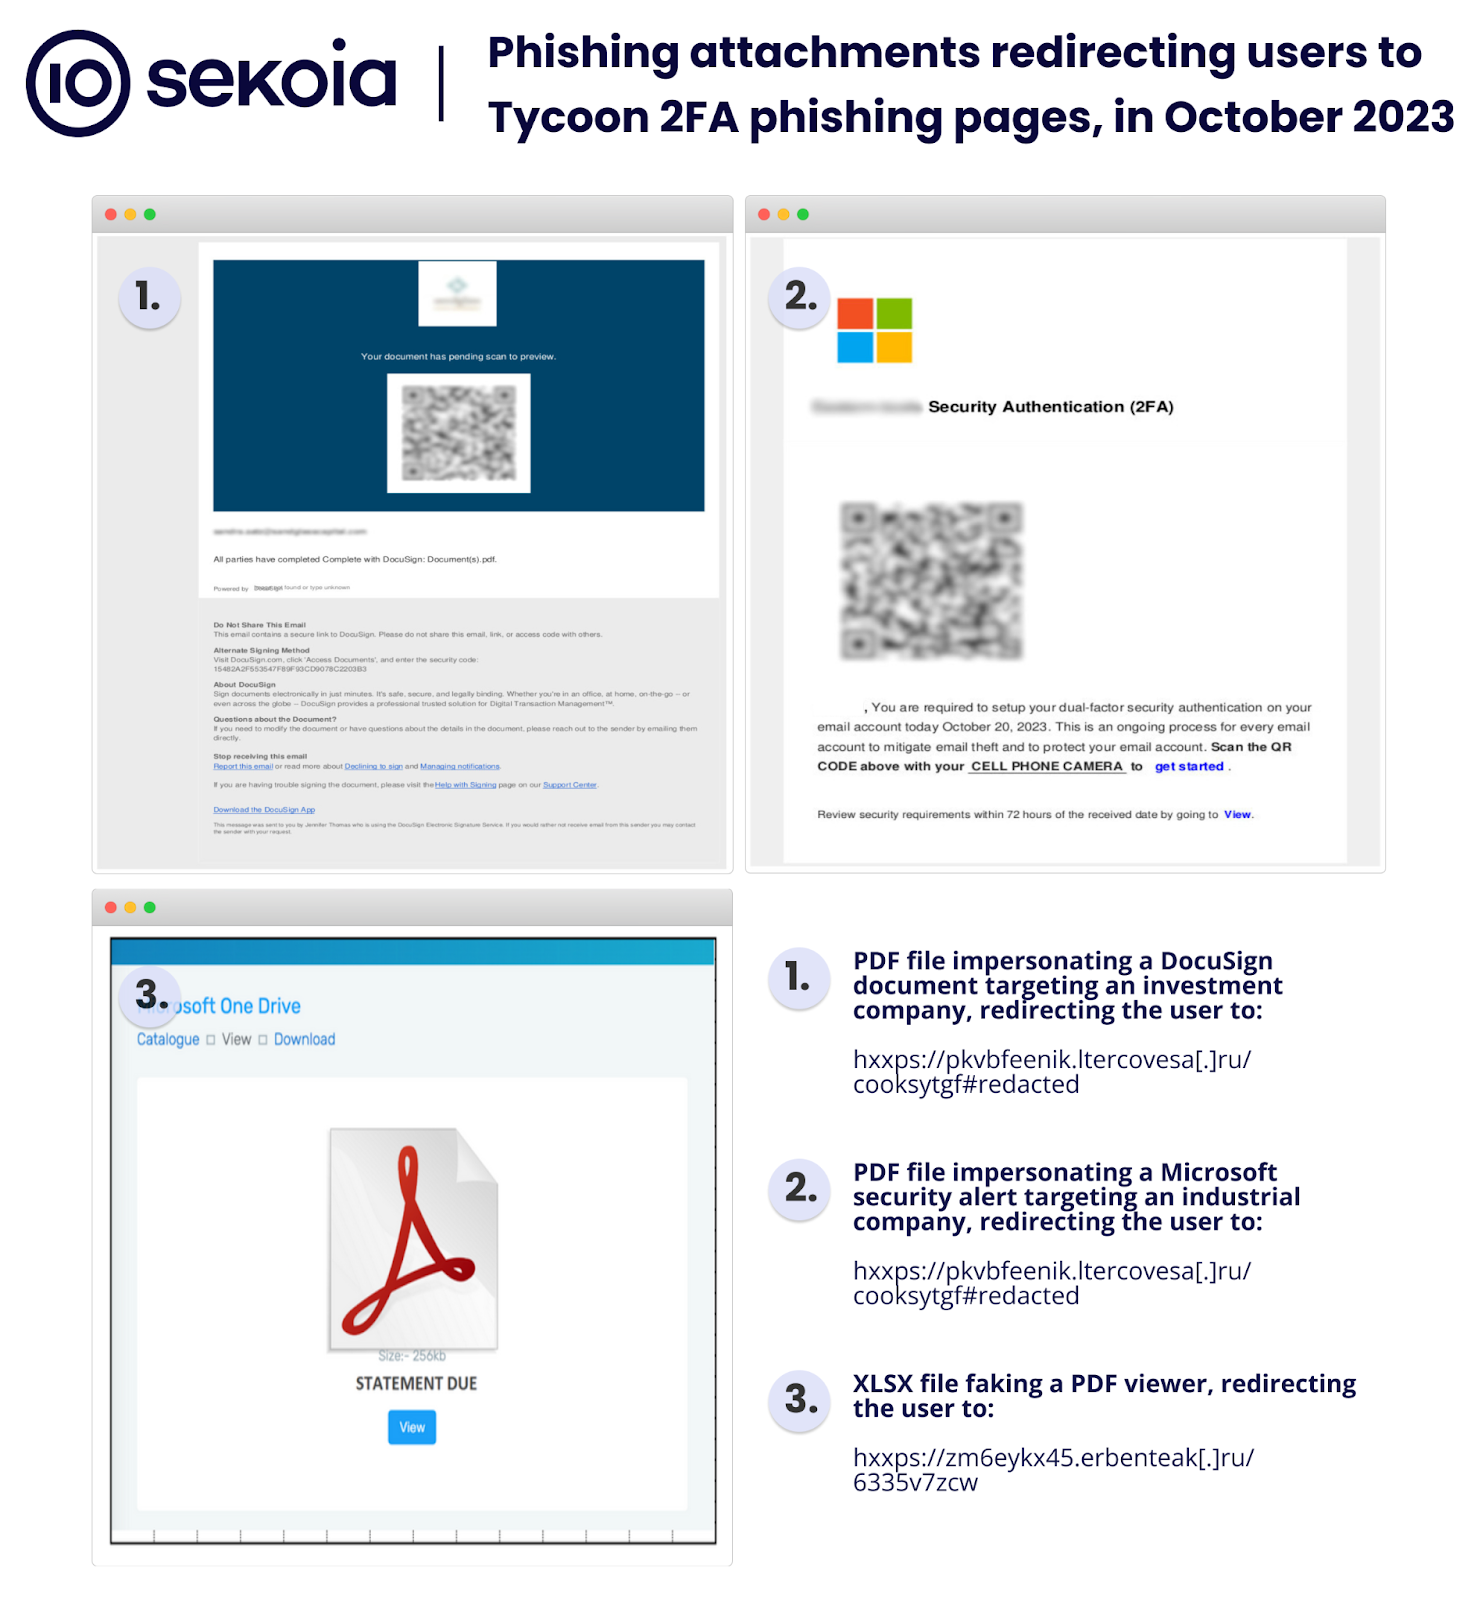 Email attachments redirecting users to Tycoon 2FA phishing pages, distributed in October 2023